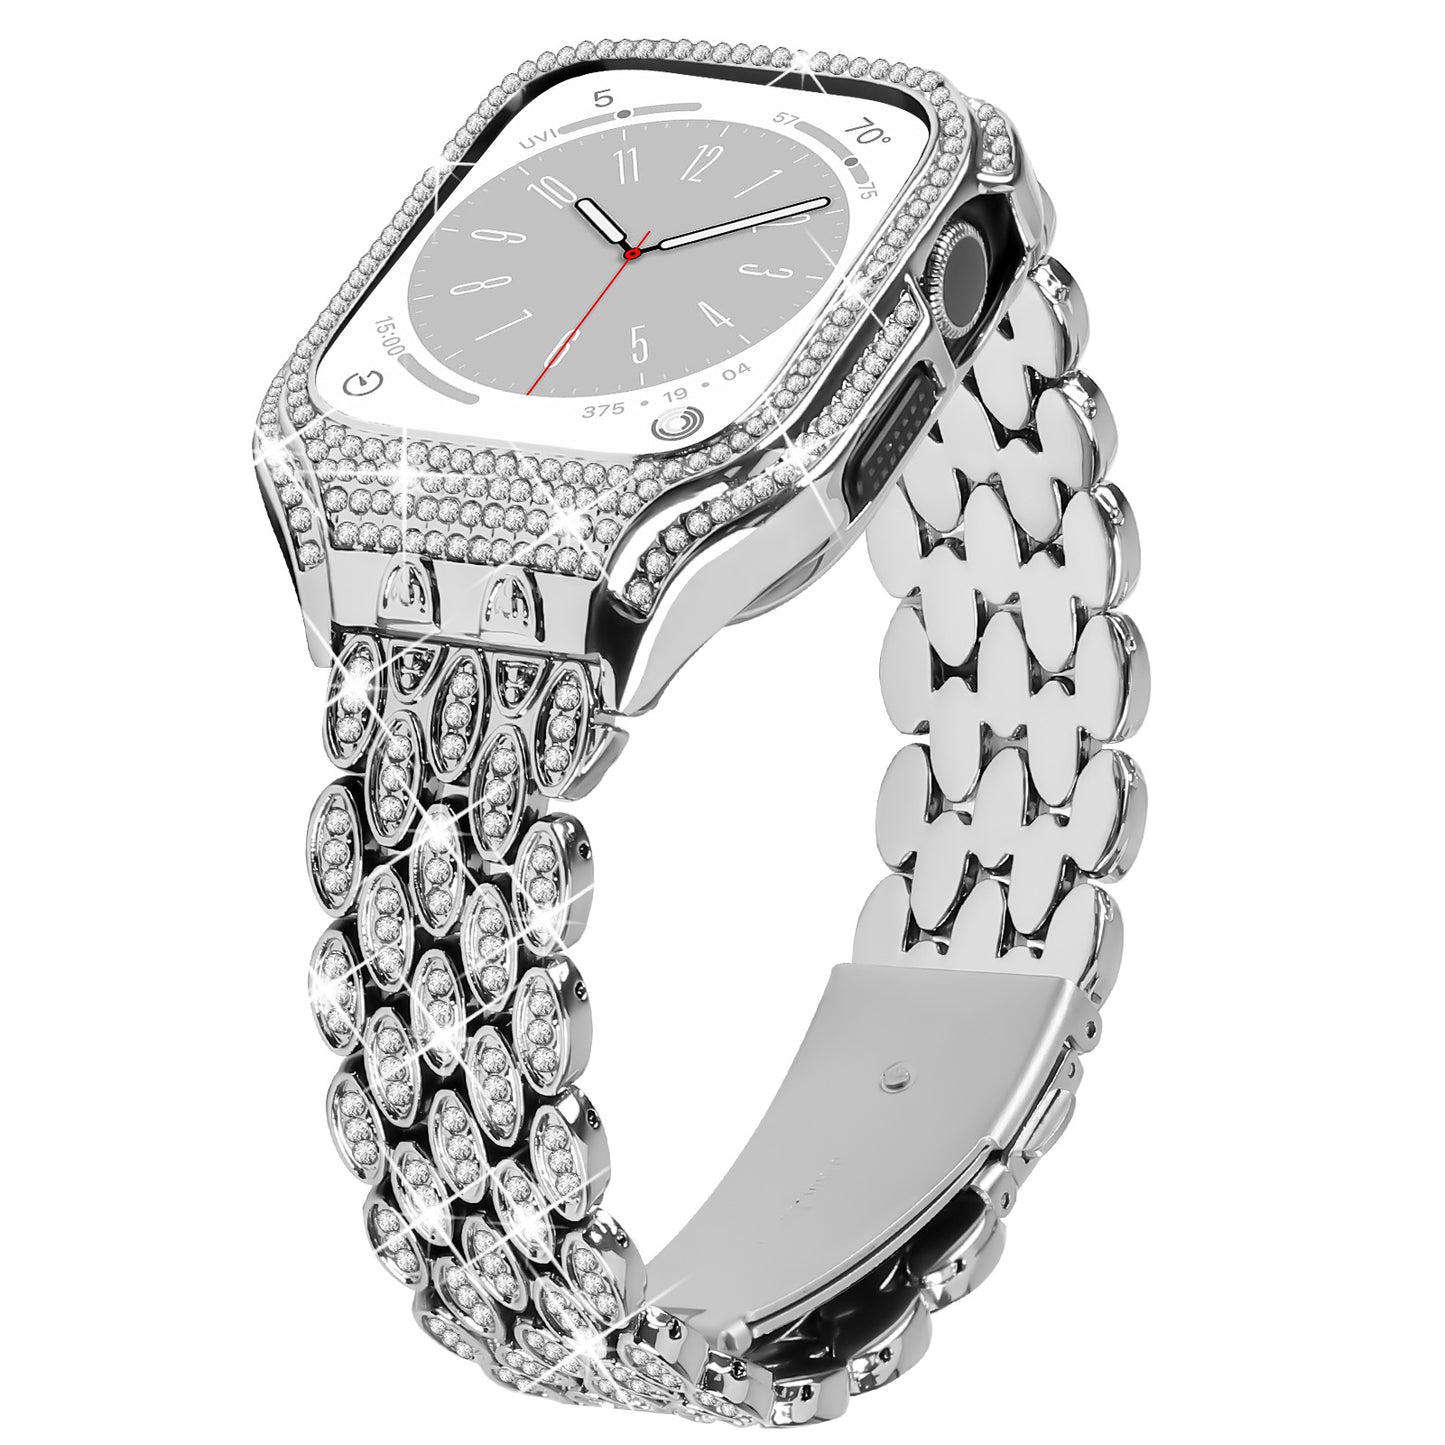 Shining Diamond Stainless Steel Integrated Protective Case Watch Strap